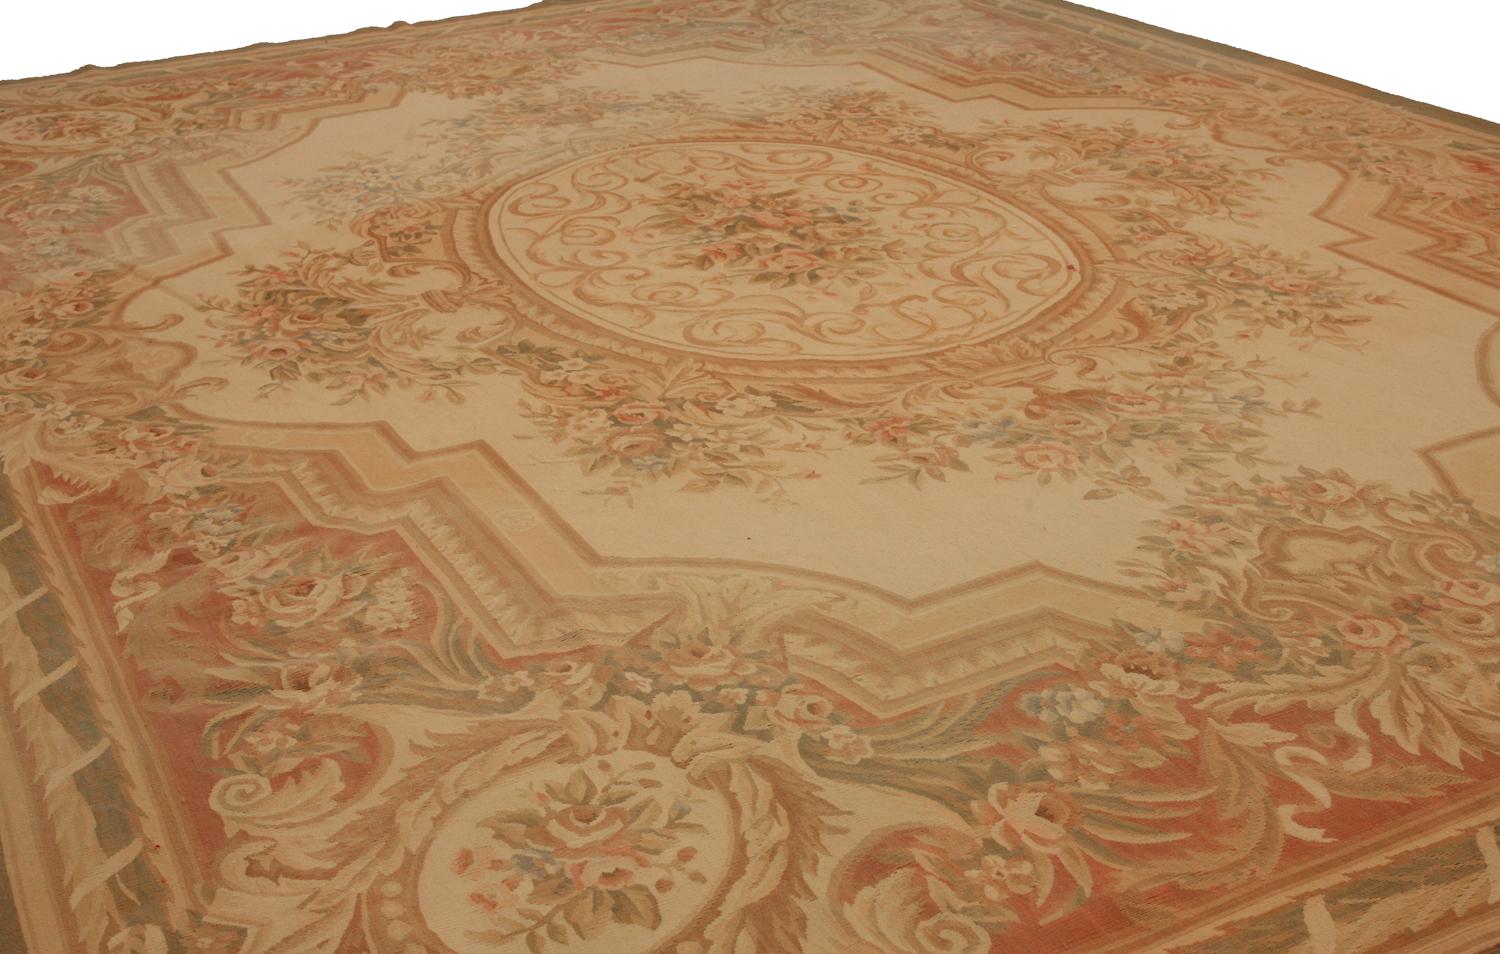 French Style Aubusson Rug with Medallion and Floral Design is a beautiful rug that is perfect for any room in your home. Its intricate medallion and floral design will add a touch of luxury and class to your space. It also features a soft color